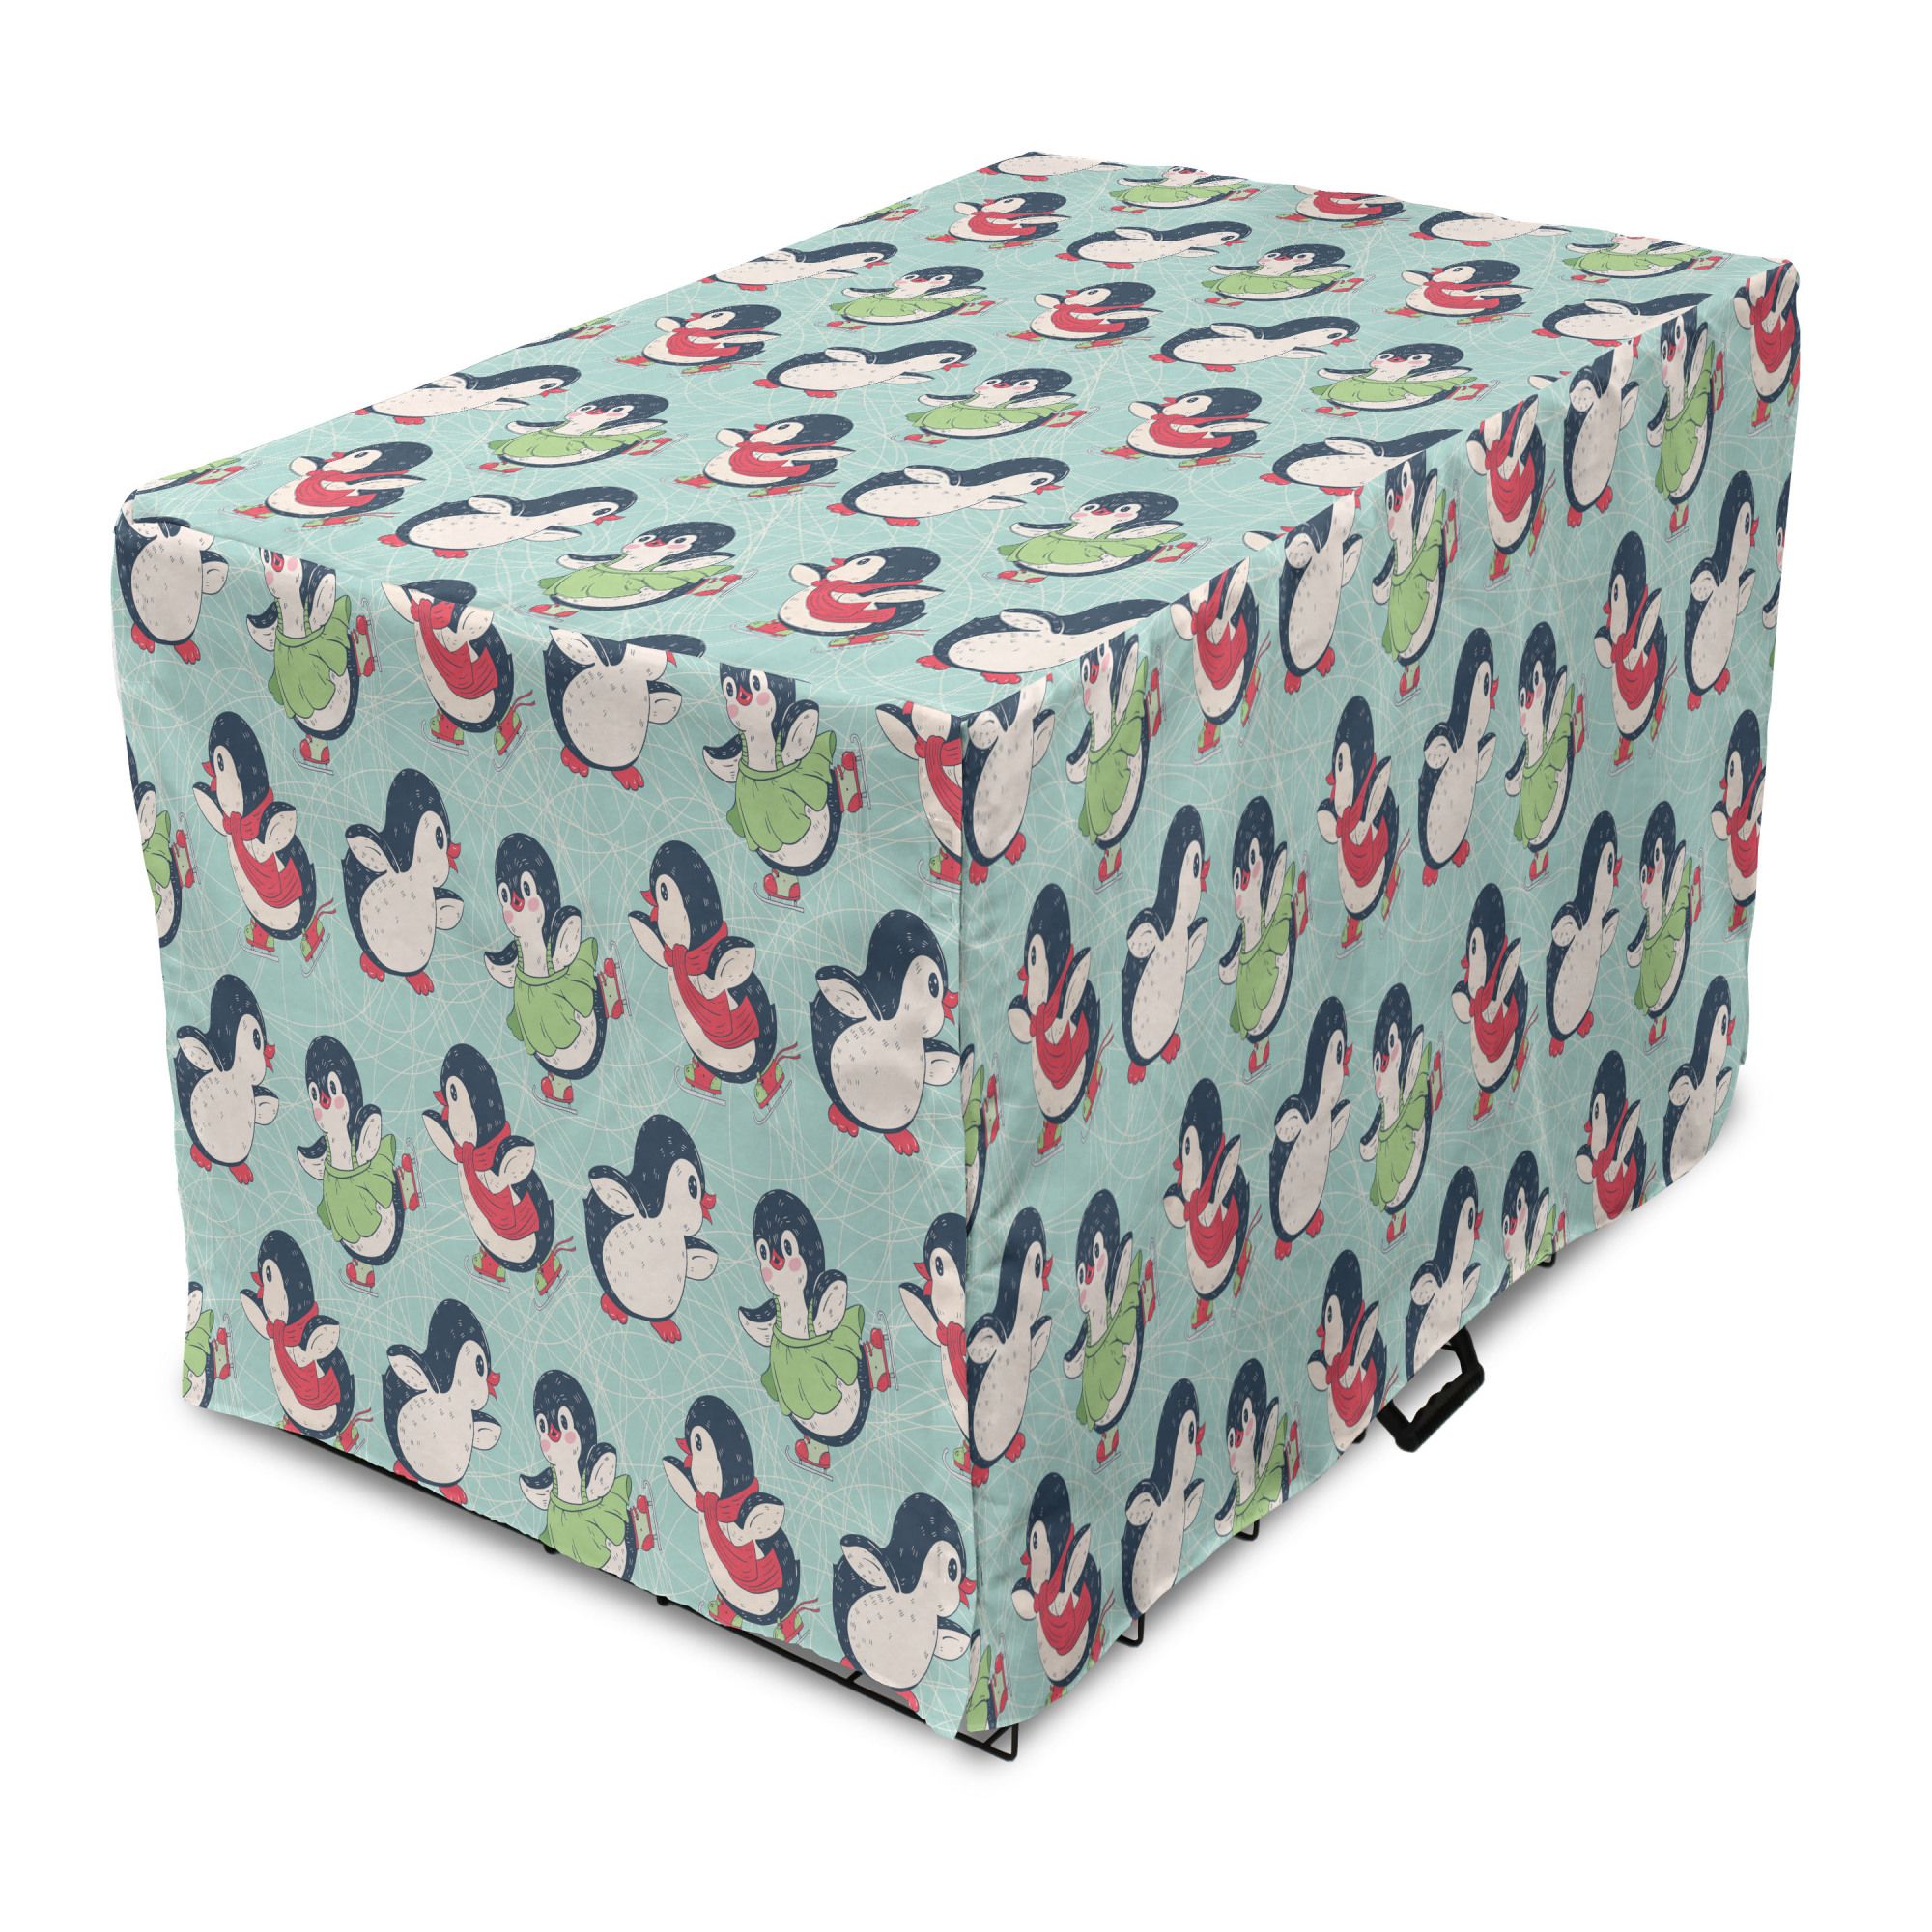 Penguin Dog Crate Cover, Cartoon Arctic Animals Ice Skating with Scarf and Skirts Pattern, Easy to Use Pet Kennel Cover Small Dogs Puppies Kittens, 7 Sizes, Pale Seafoam Multicolor, by Ambesonne - image 1 of 6